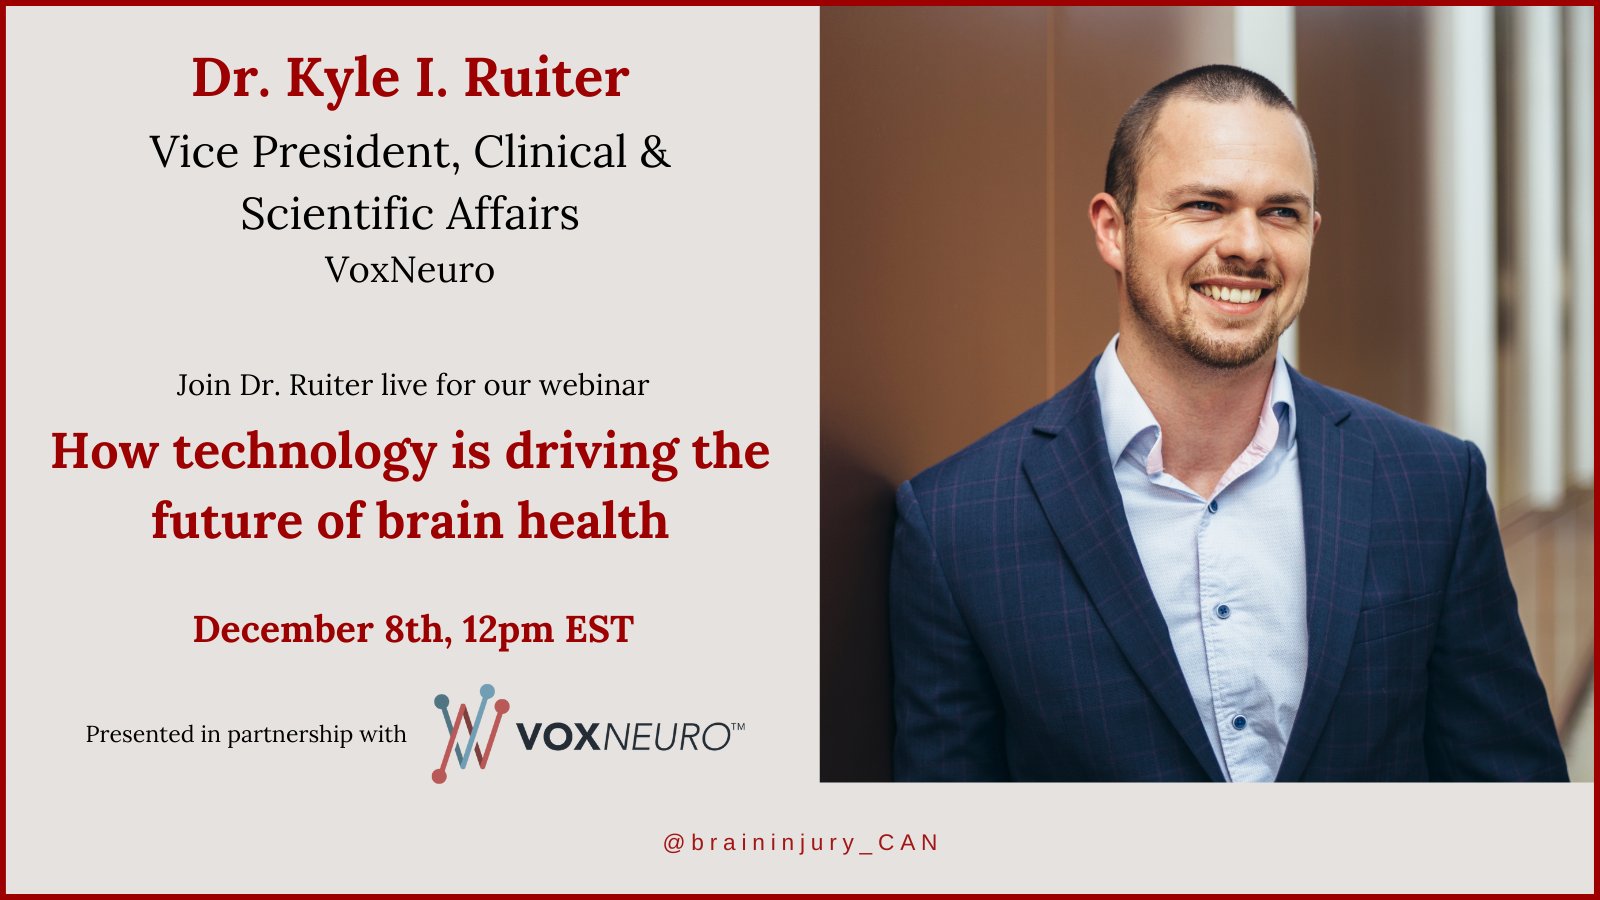 Welvarend wraak koolhydraat Brain Injury Canada on Twitter: "Dr. Ruiter is a neuroscientist responsible  for VoxNeuro's standard of care for patients. This role includes expanding  the medical applications of VoxNeuro's technology. Join Dr. Ruiter for